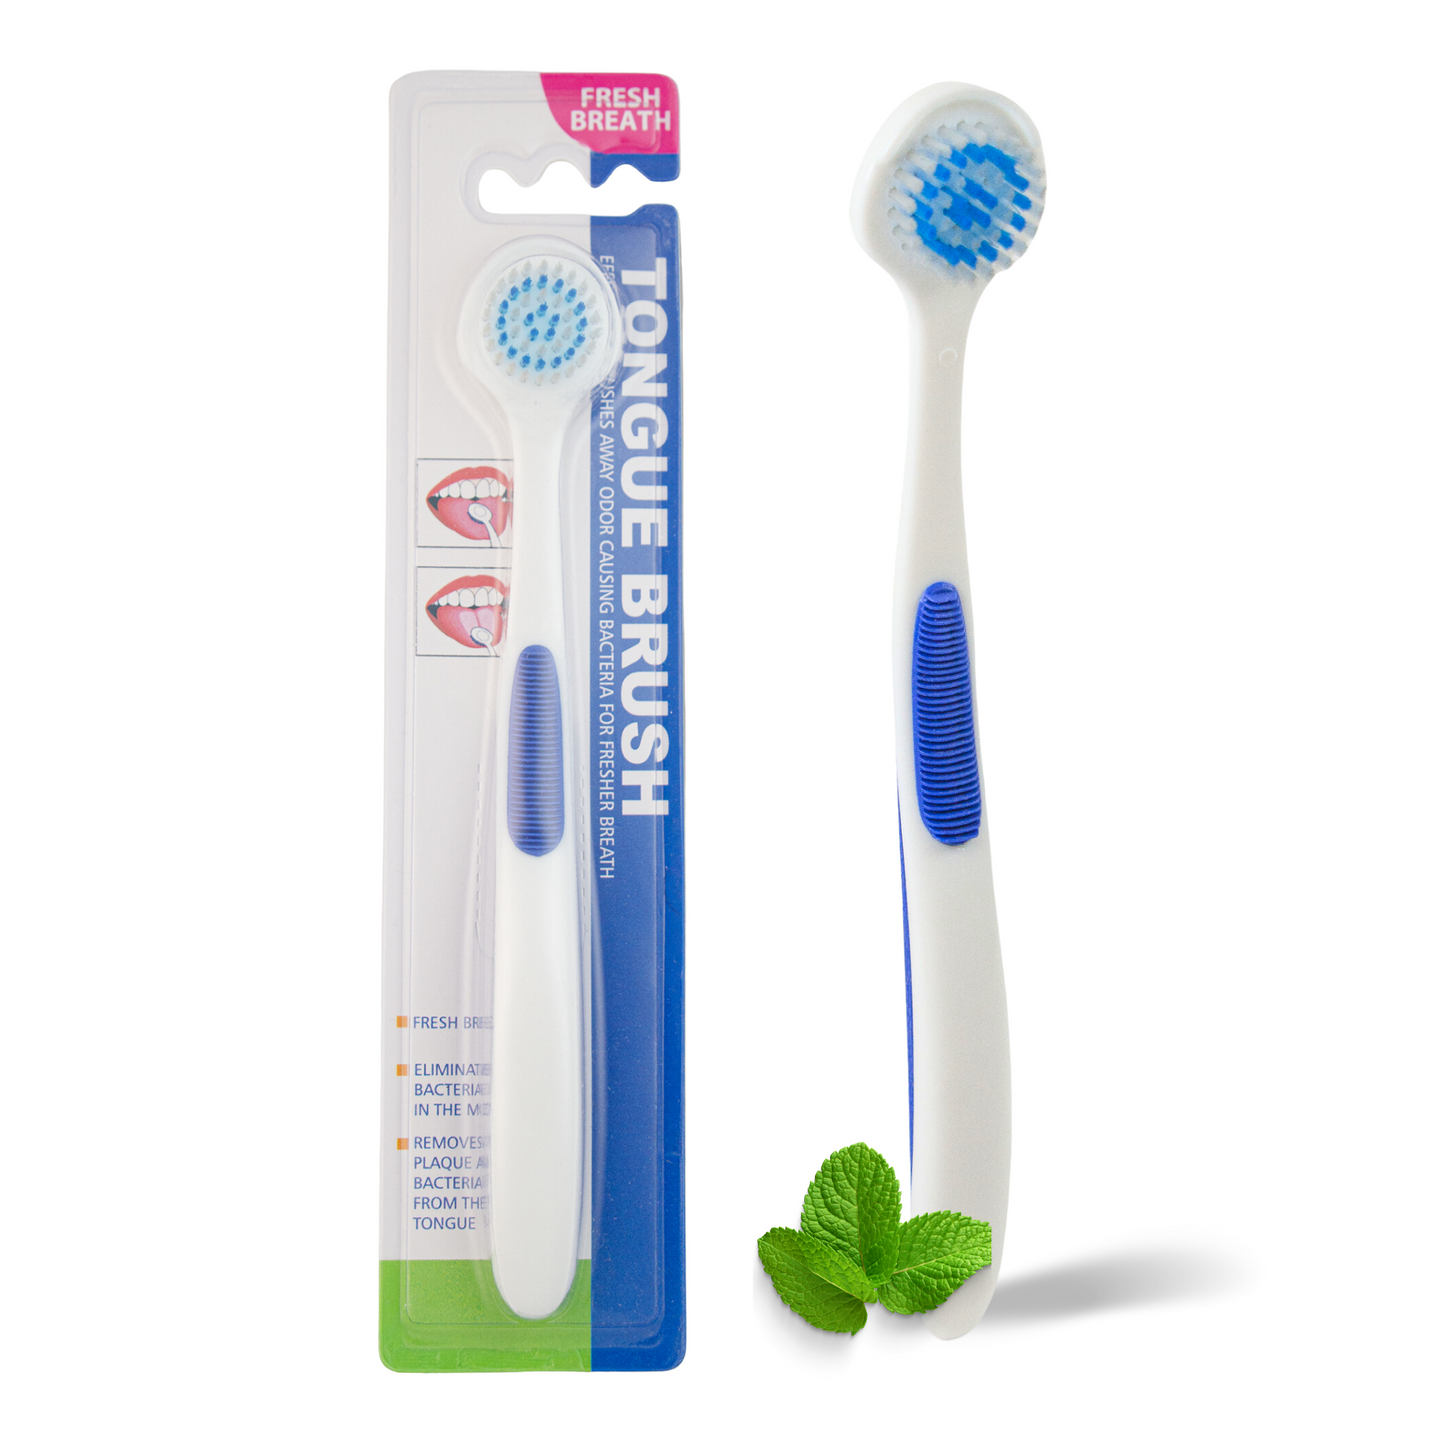 Tongue Brush for Fresh Breath Perfect Tongue Scraper for Adults and Kids, Enhance Your Oral Hygiene with Tongue Brushes, Scrapers for Bad Breath Treatment